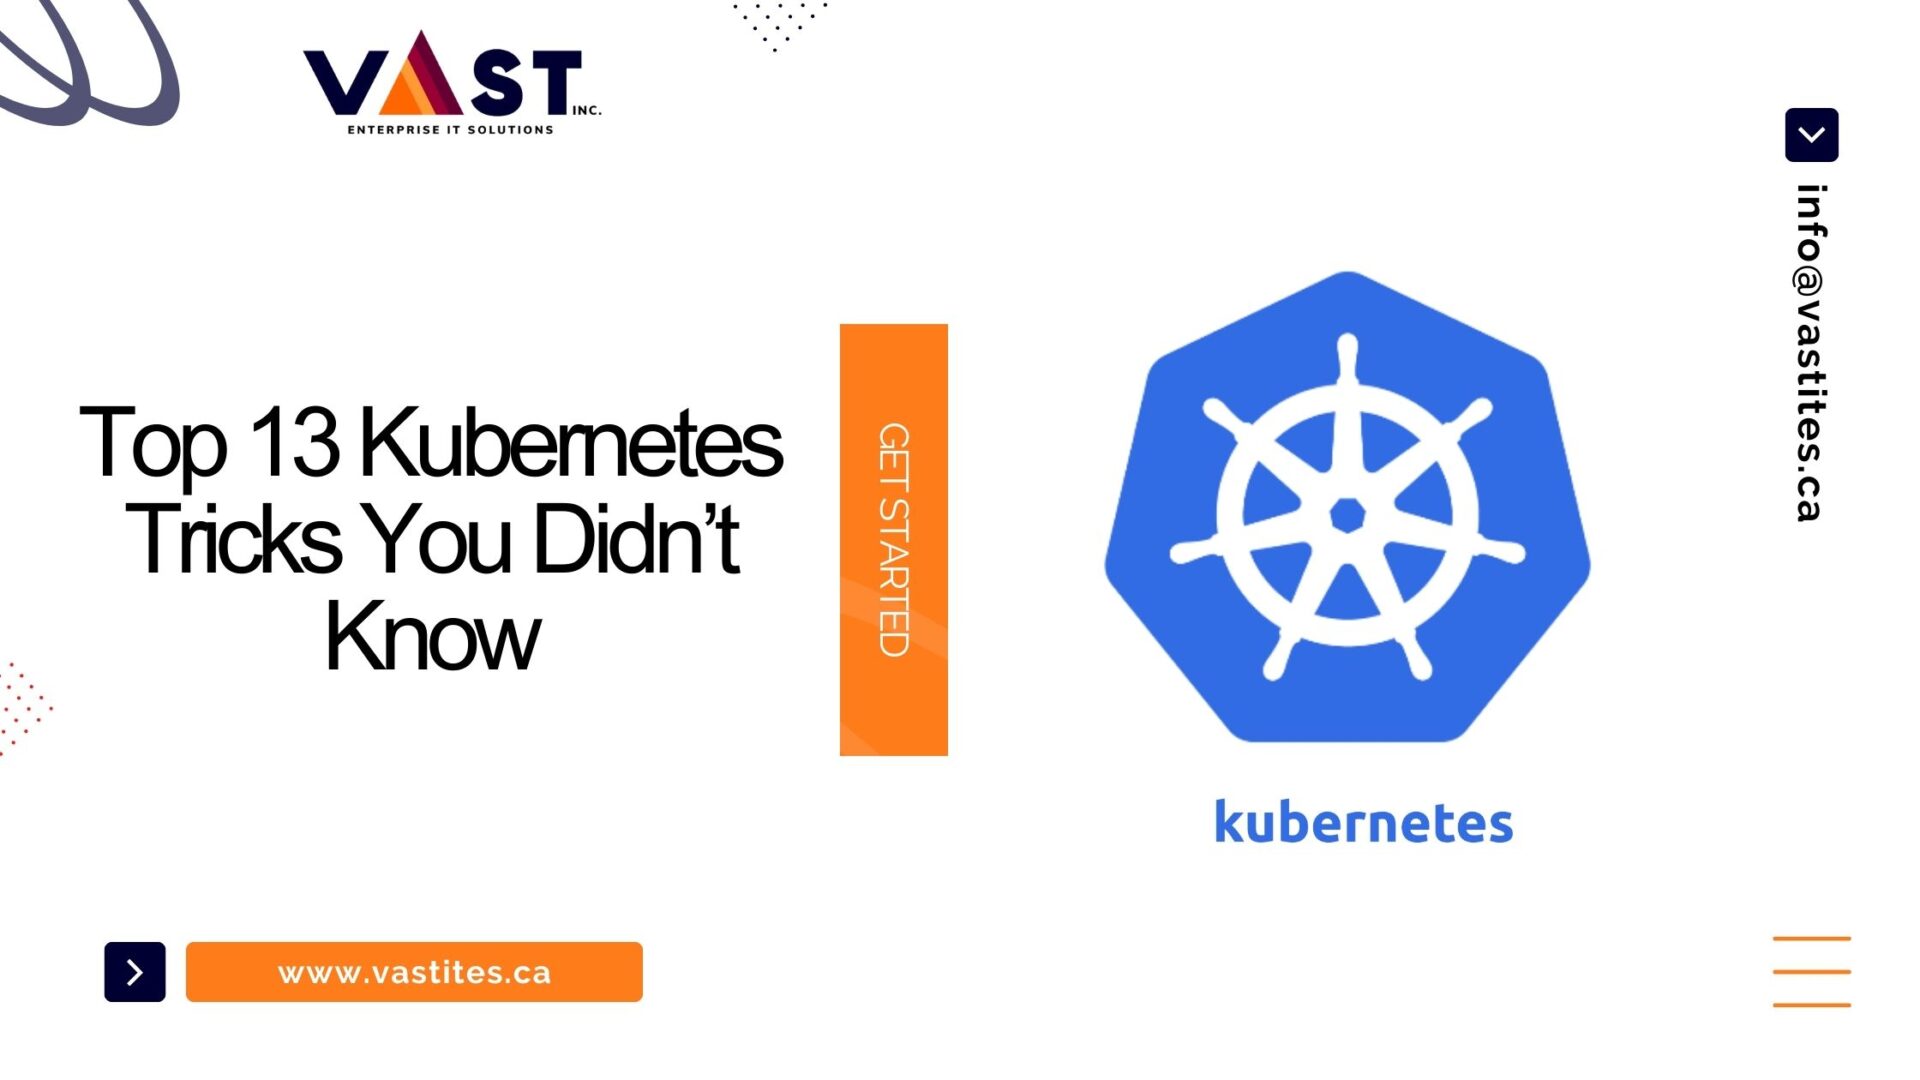 Top 13 Kubernetes Tricks You Didn’t Know